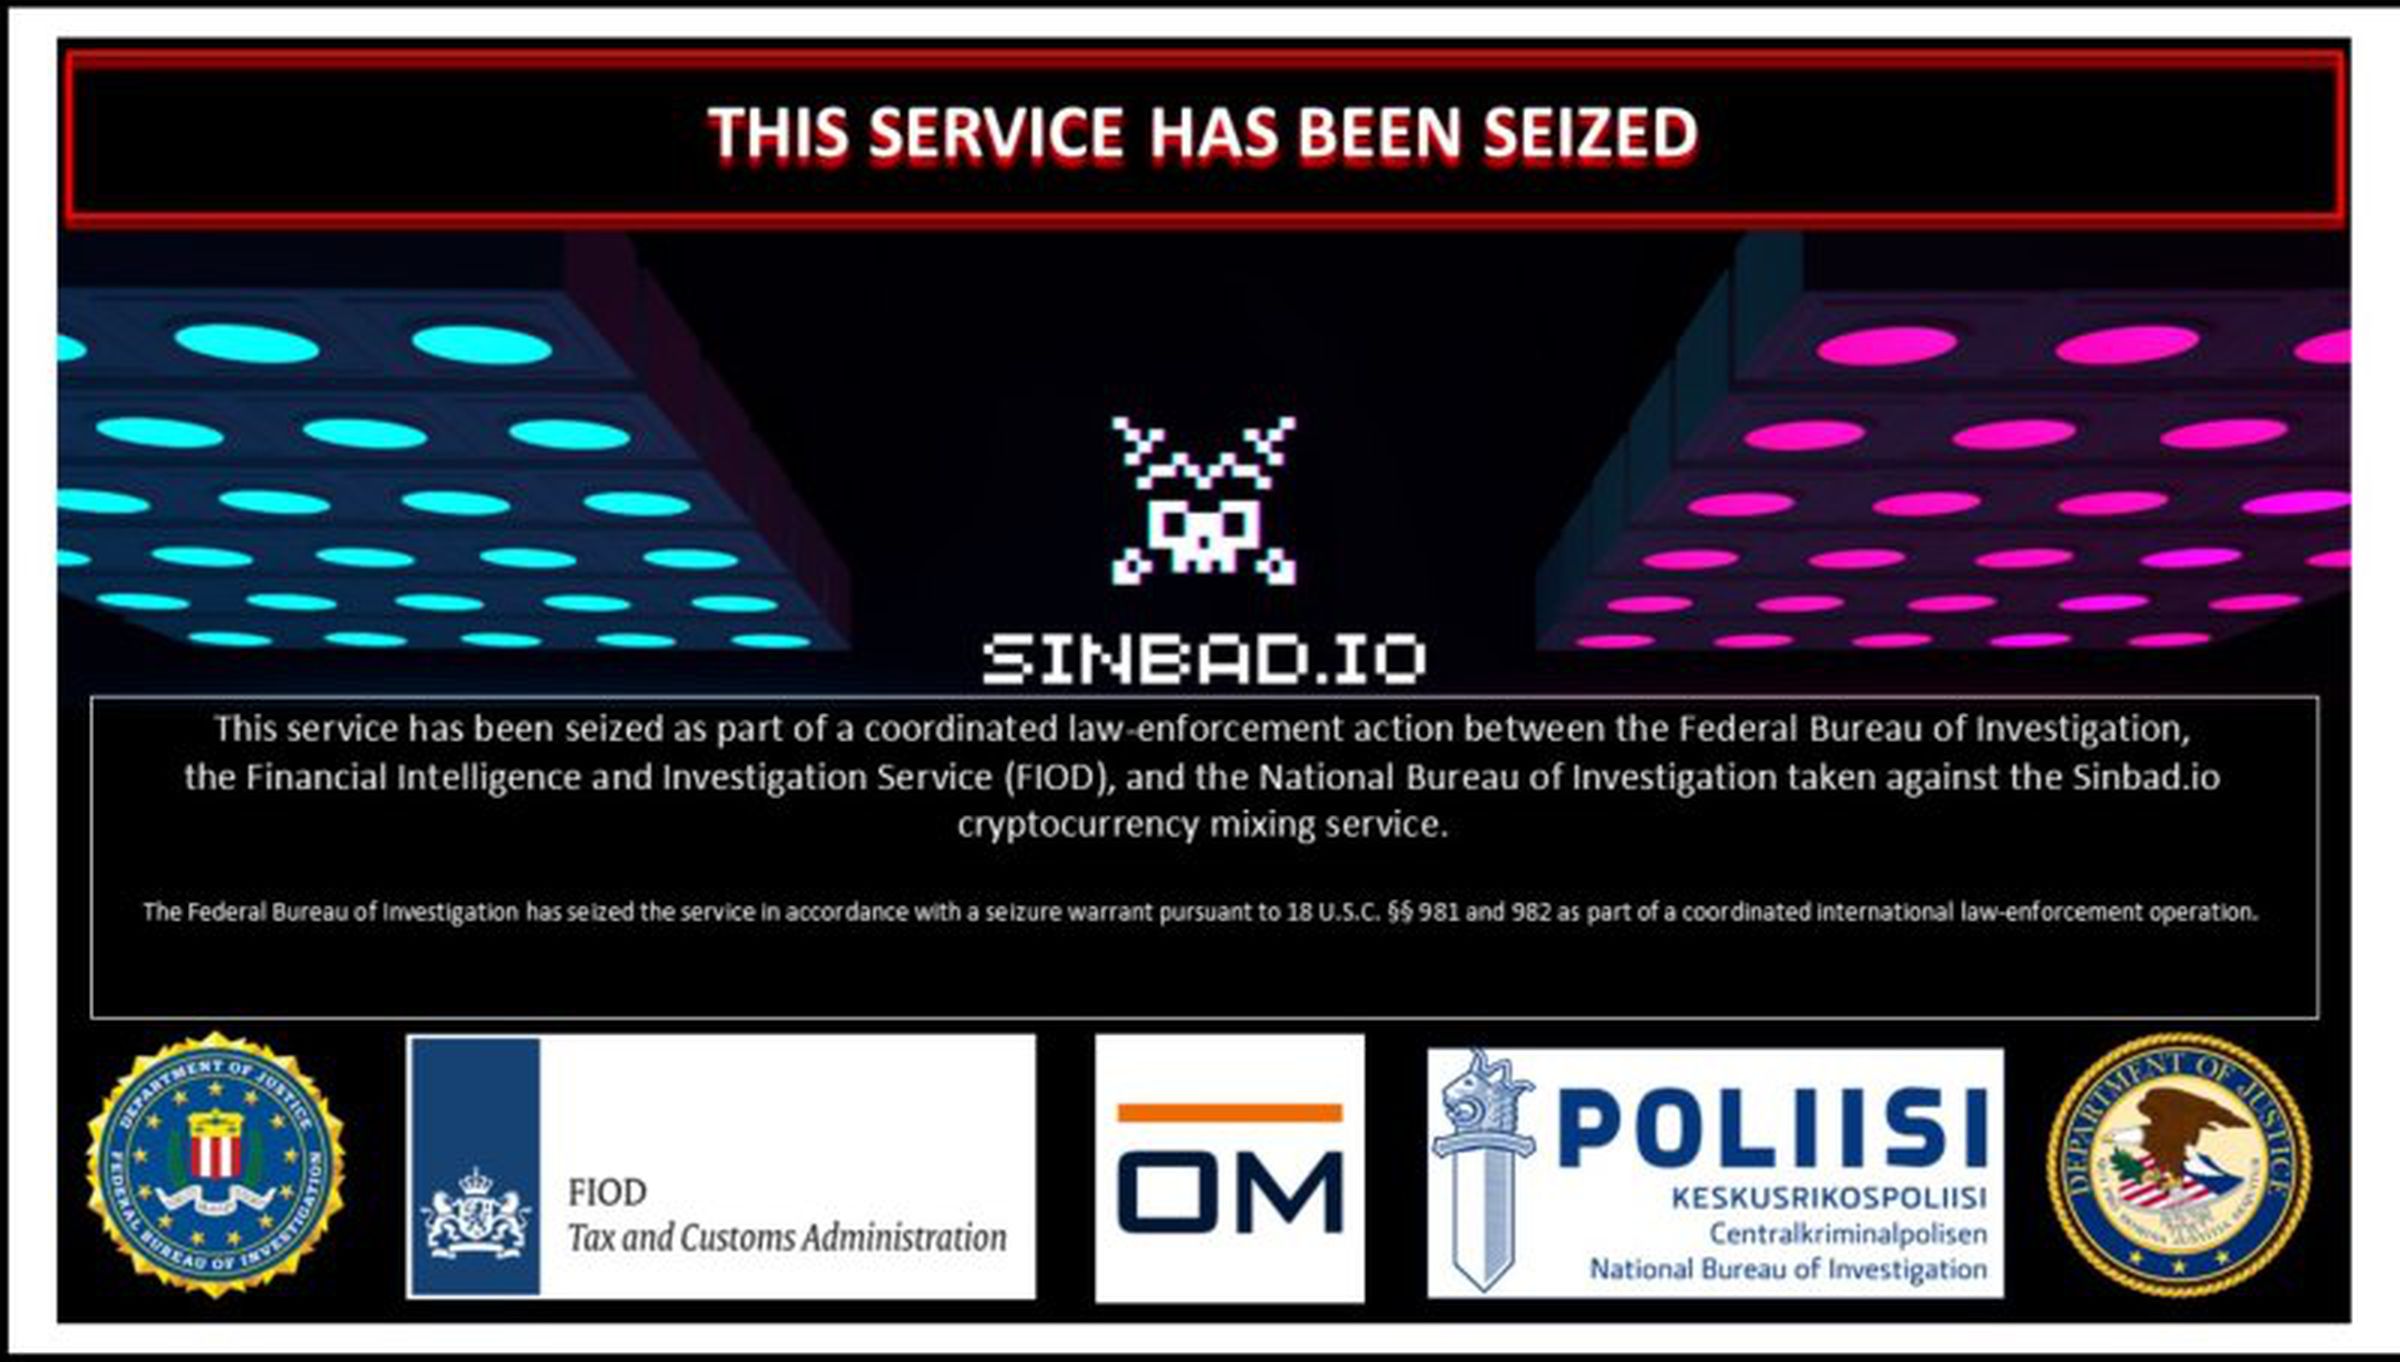 Screenshot of the seizure notice posted to Sinbad.io by the FBI and other agencies.